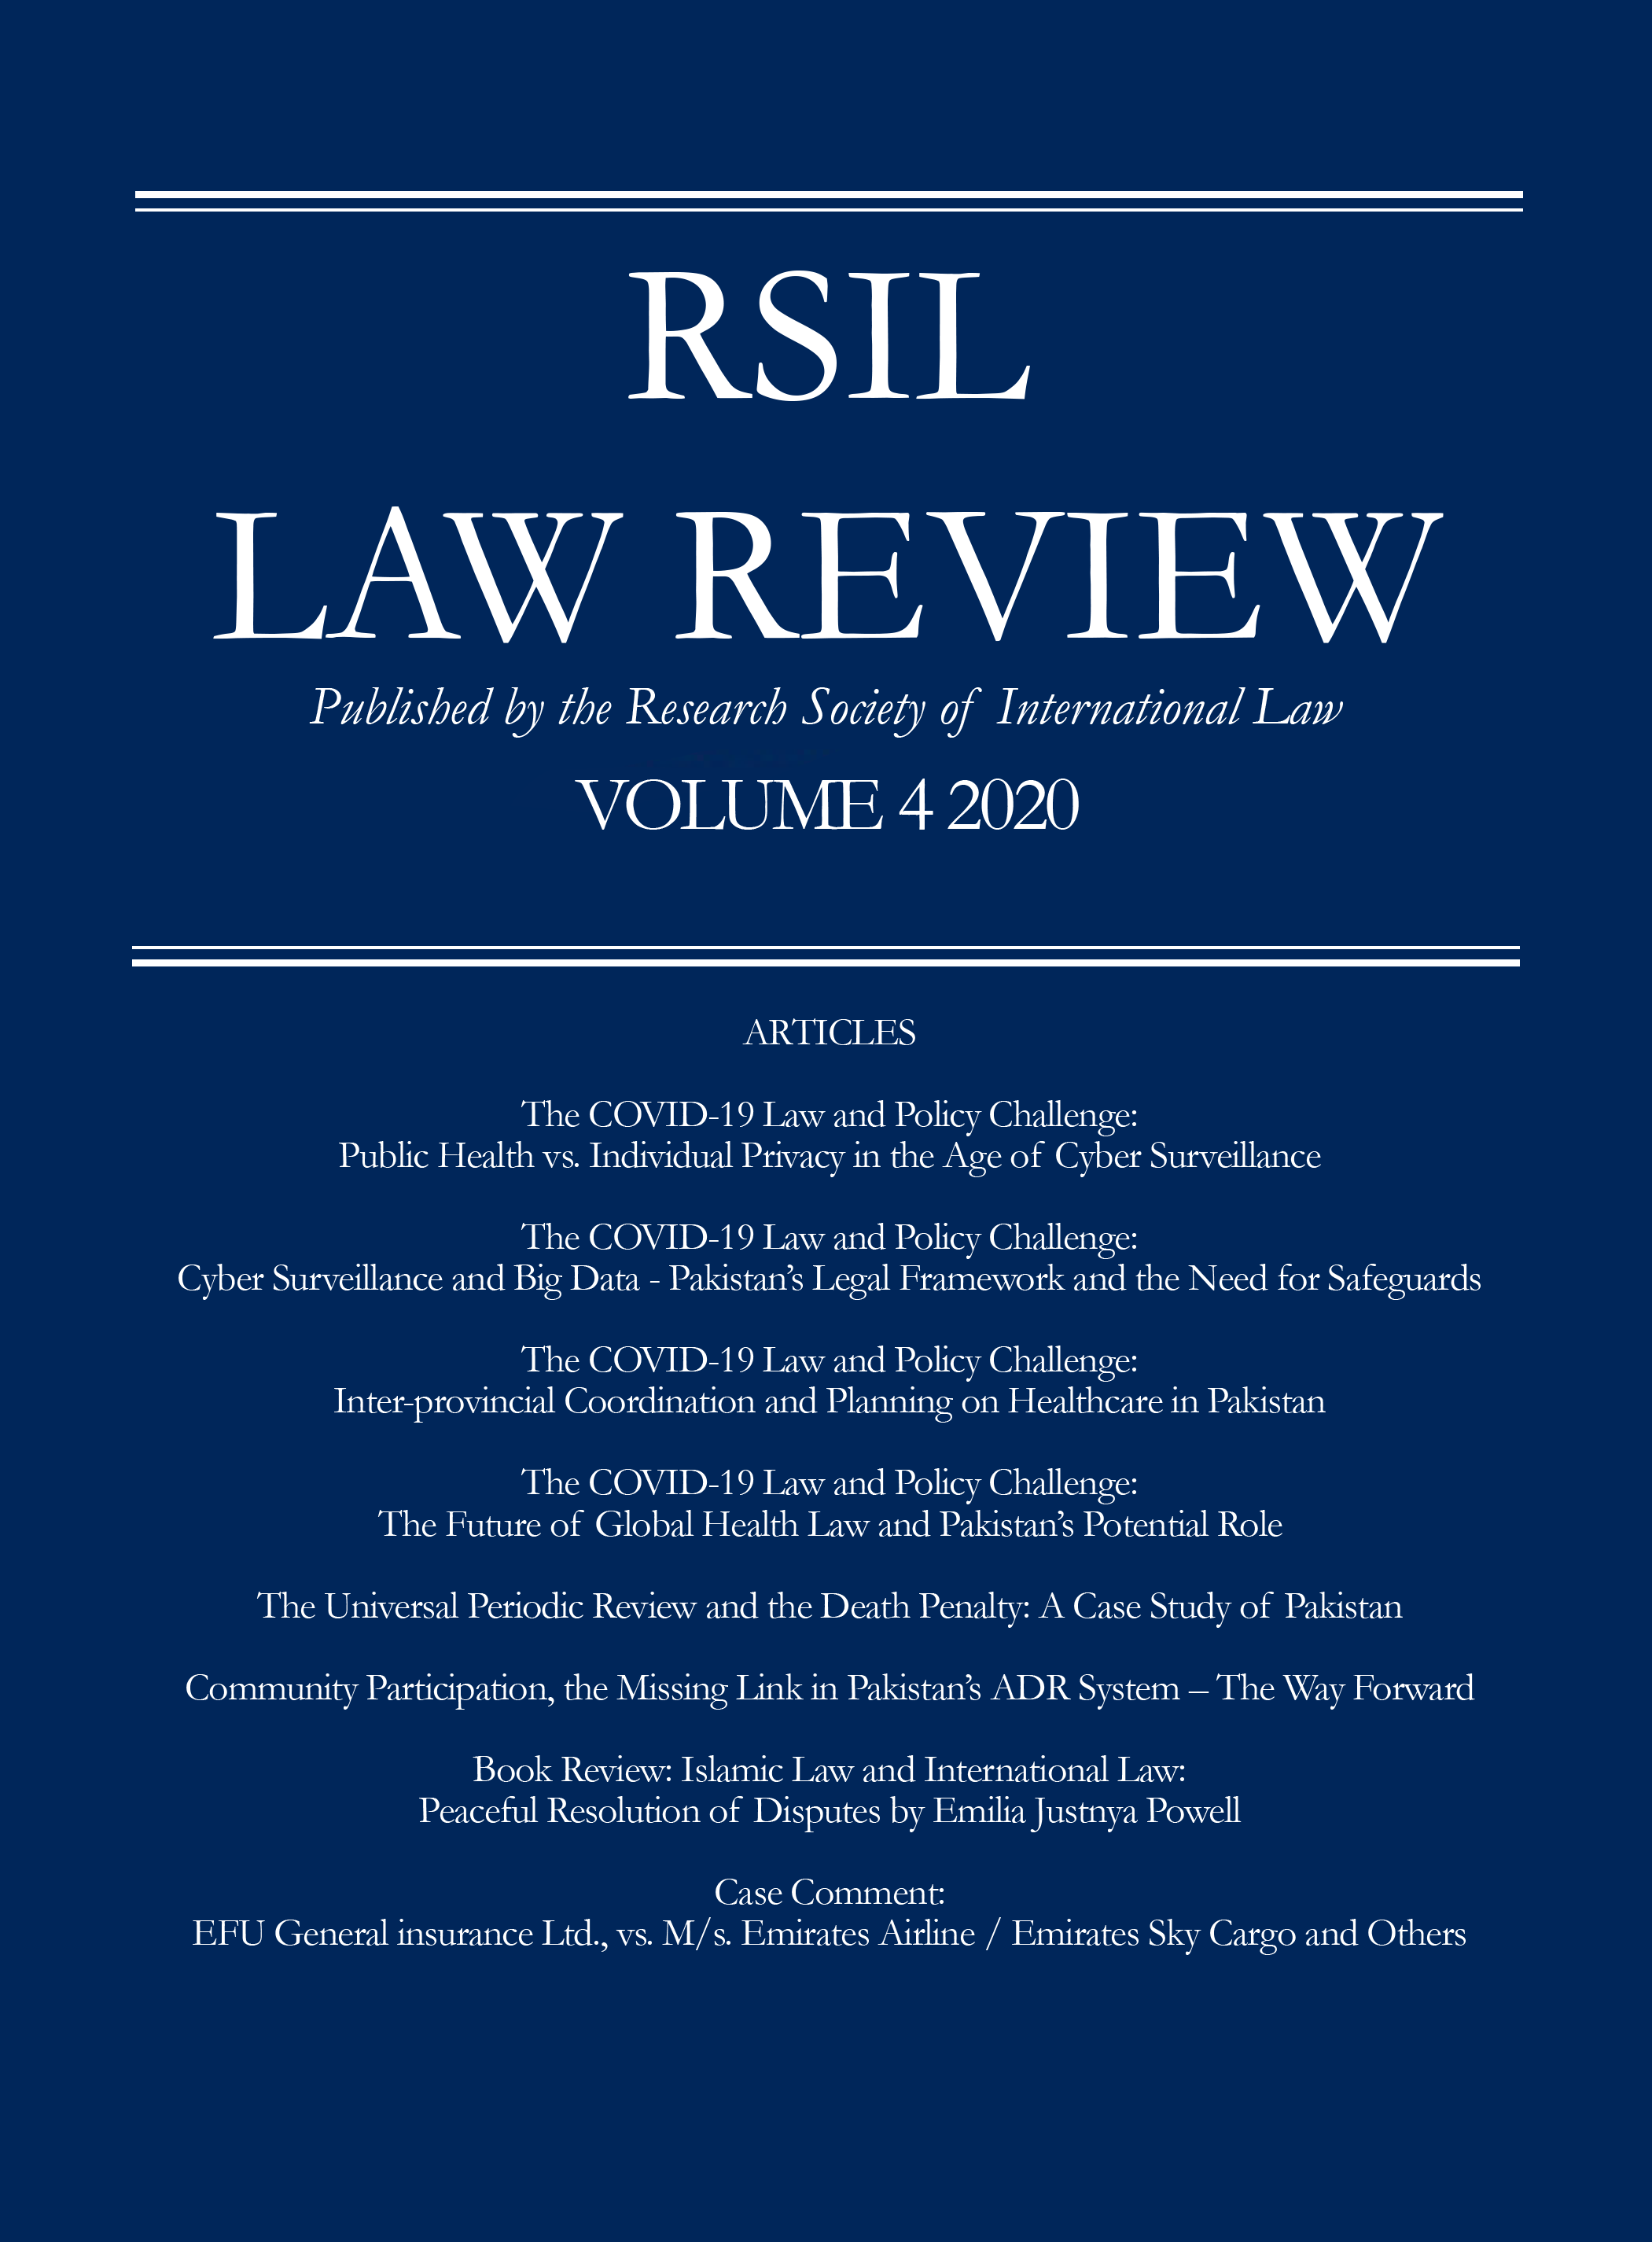 RSIL Law Review Vol. 4 2020